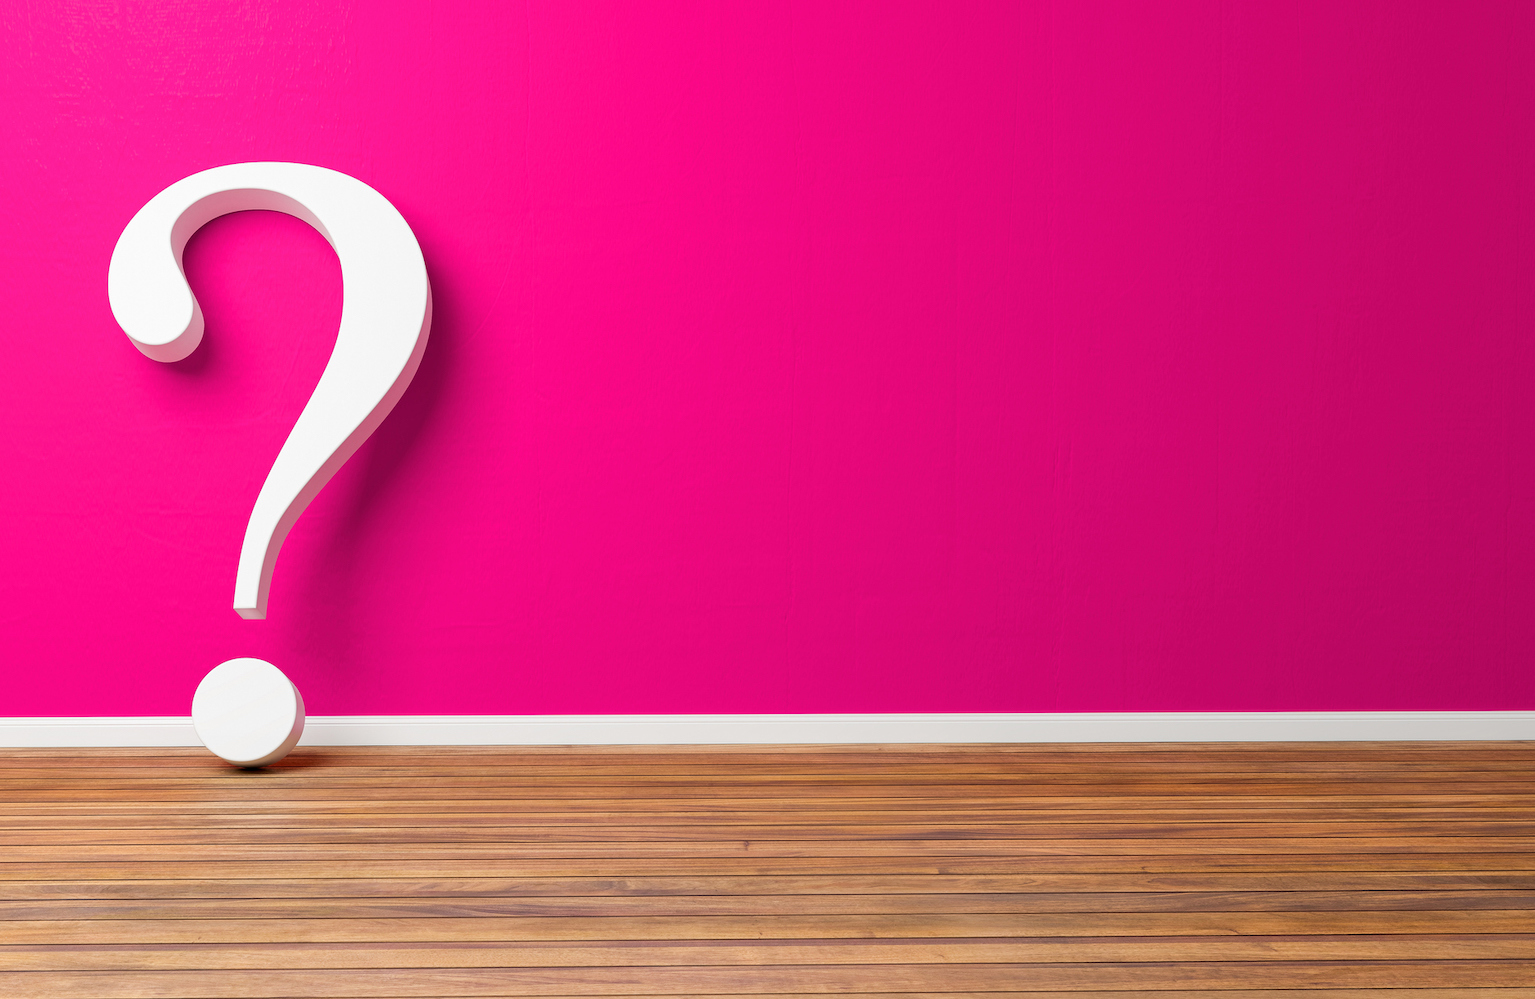 White question mark on pink concrete grunge wall -3D-Illustration